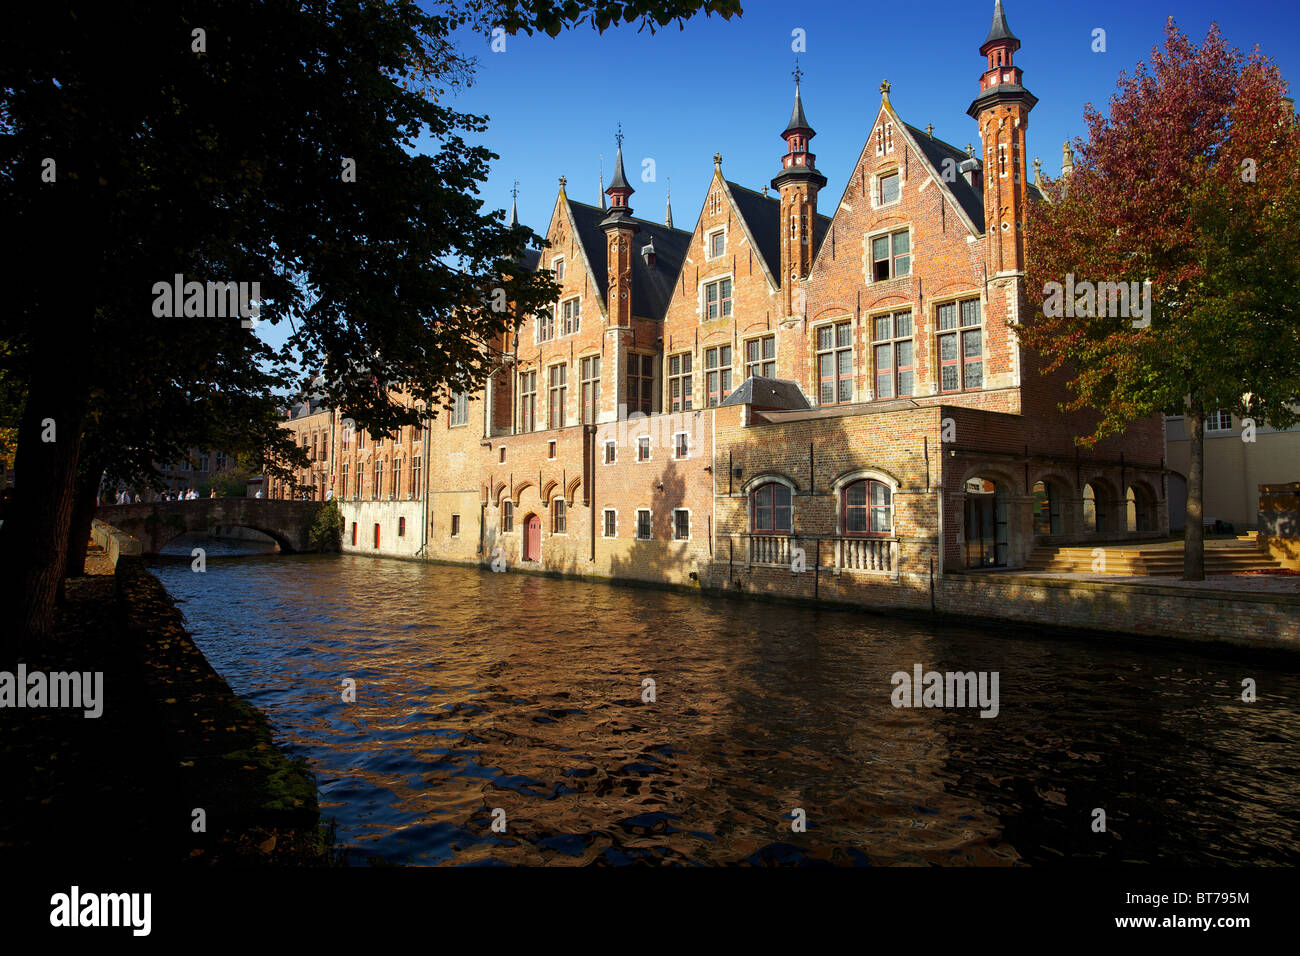 Old restored buildings on a canal in Bruges Stock Photo